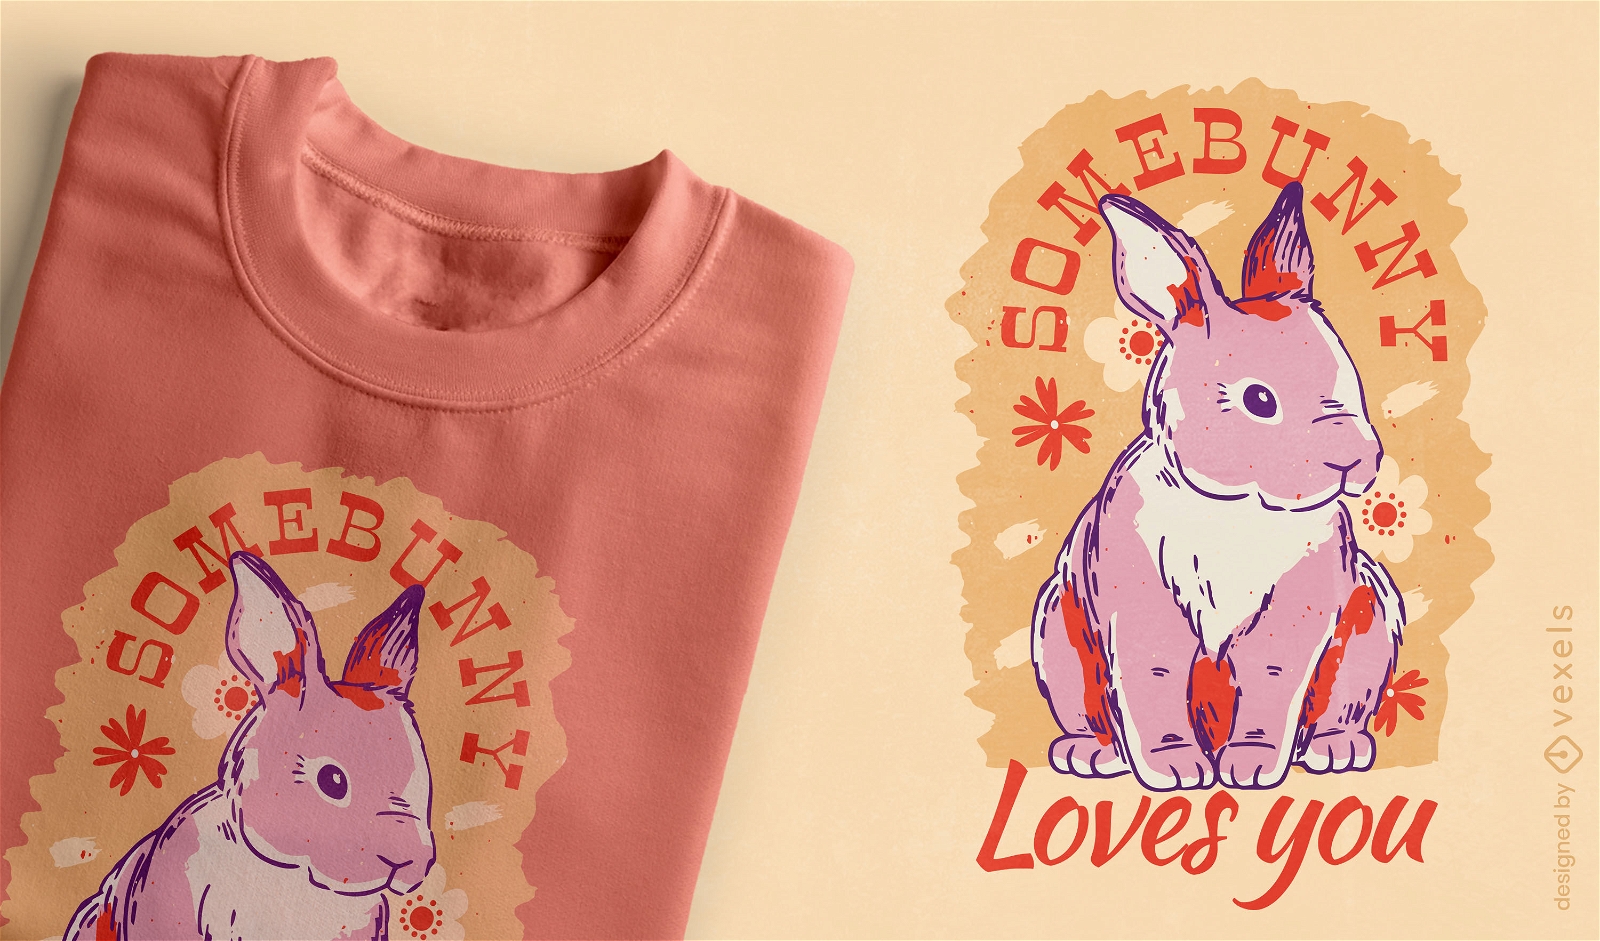 Bunny loves you quote t-shirt design